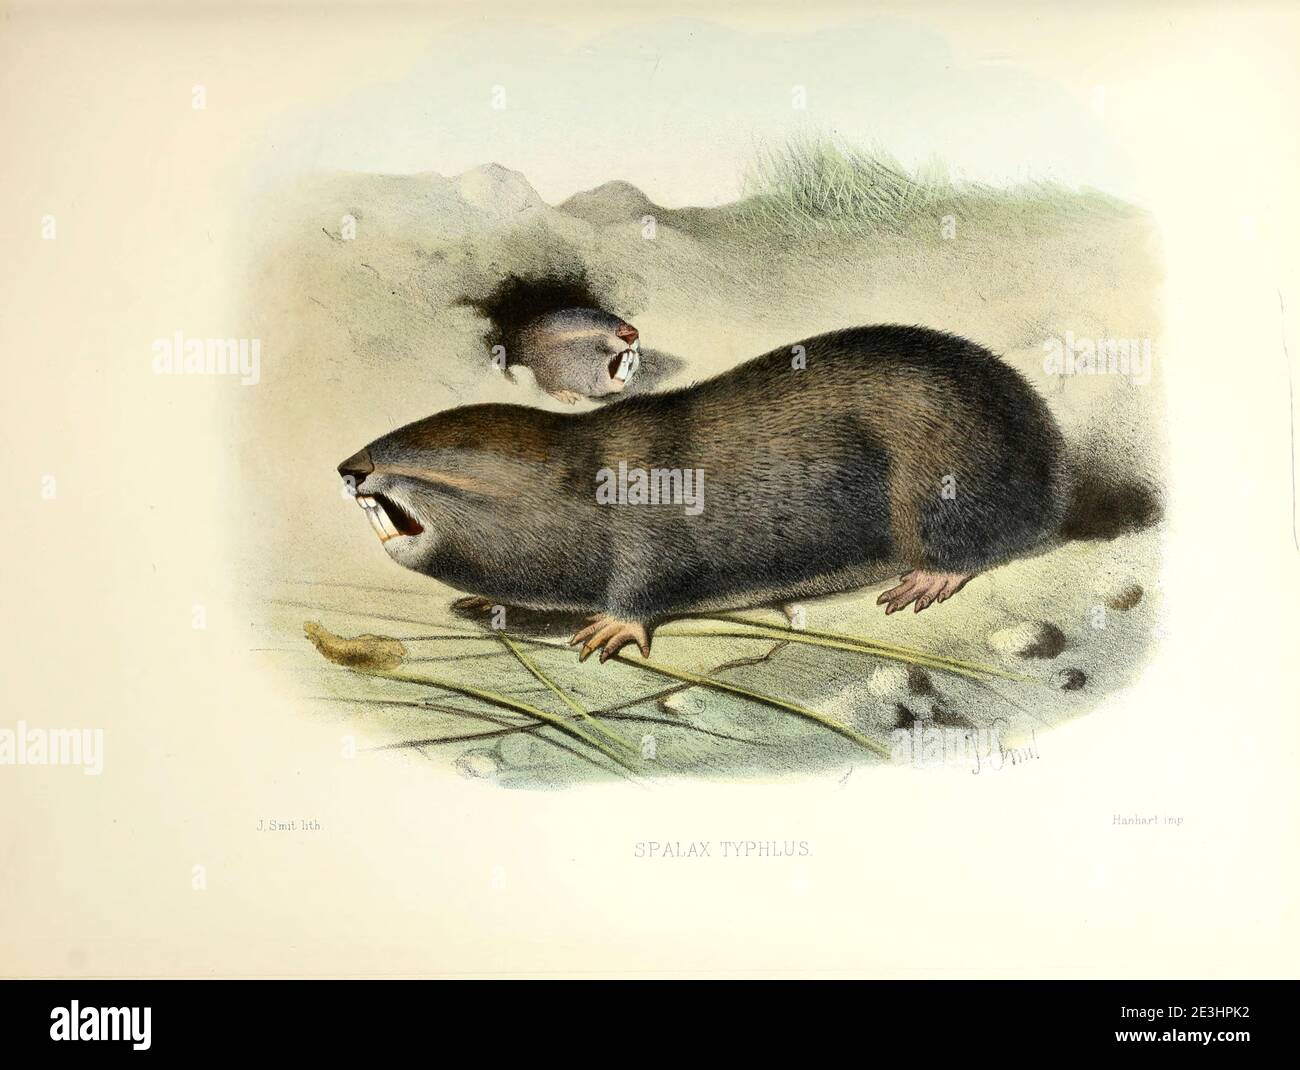 The greater mole-rat (Spalax microphthalmus [here as Spalax typhlus]) is a species of rodent in the family Spalacidae.[2] ItFrom the survey of western Palestine. The fauna and flora of Palestine by Tristram, H. B. (Henry Baker), 1822-1906 Published by The Committee of the Palestine Exploration Fund, London, 1884 Stock Photo